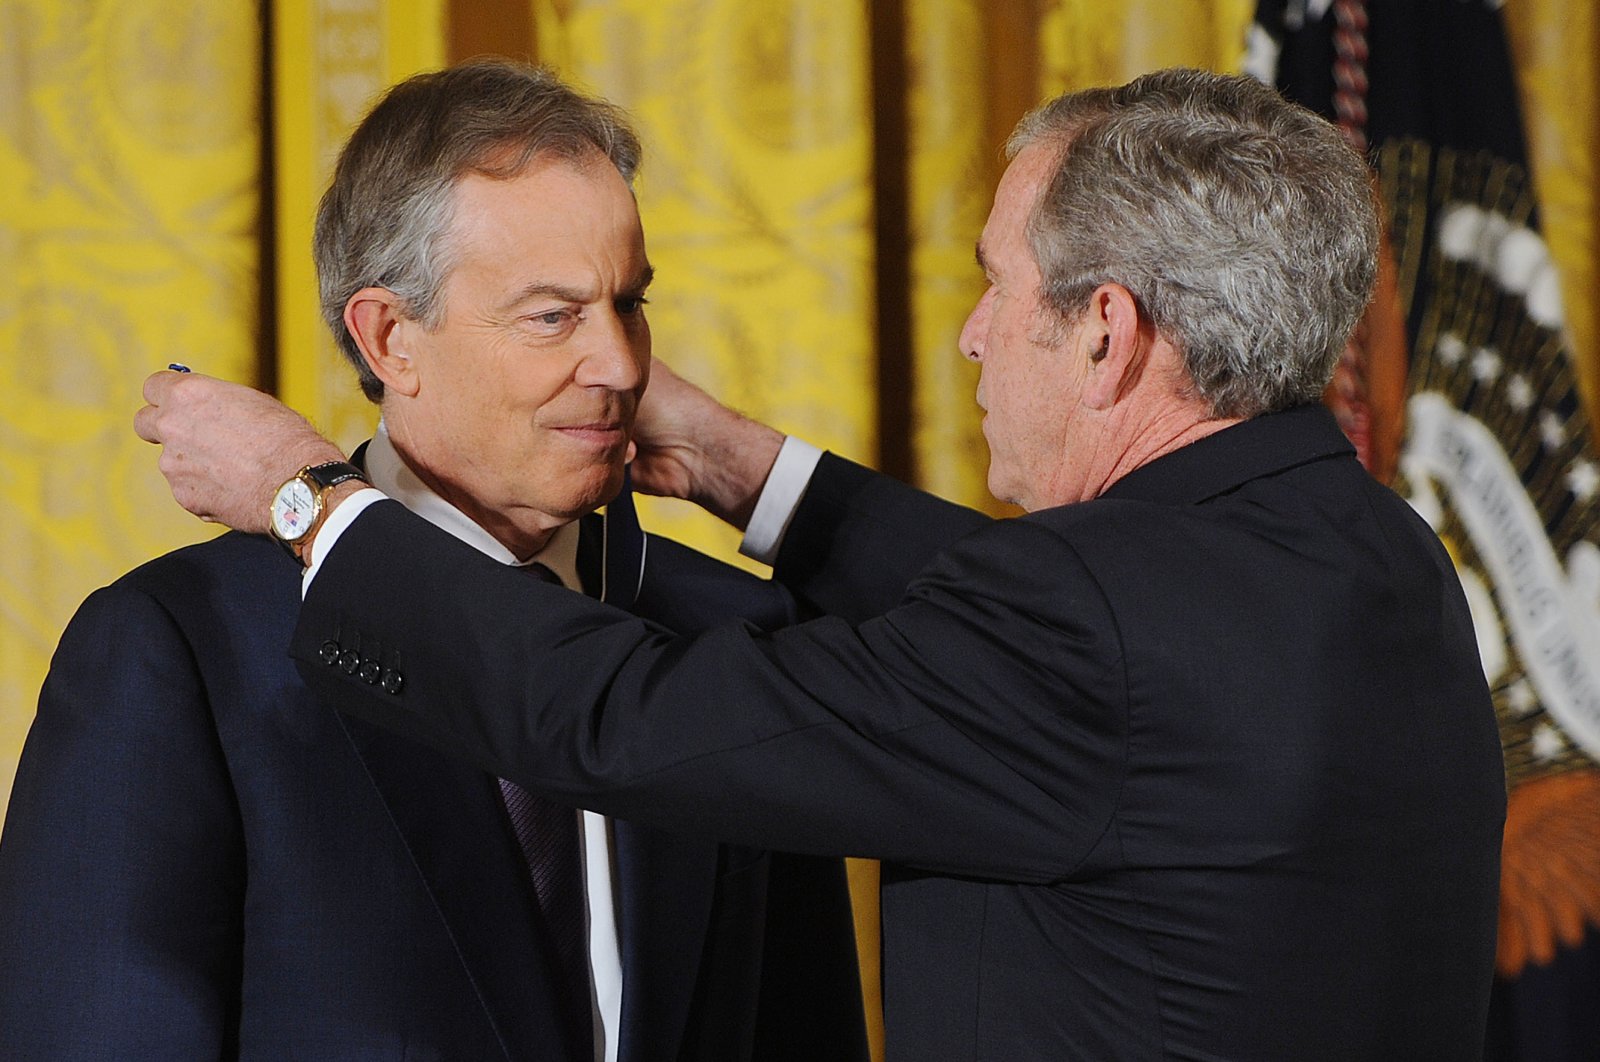 Former U.S. President George W. Bush (R) presents Britain's former Prime Minister Tony Blair with the Presidential Medal of Freedom, on the last days of his presidency, at the White House, Washington, D.C., U.S., Jan. 13, 2009. (Reuters Photo)